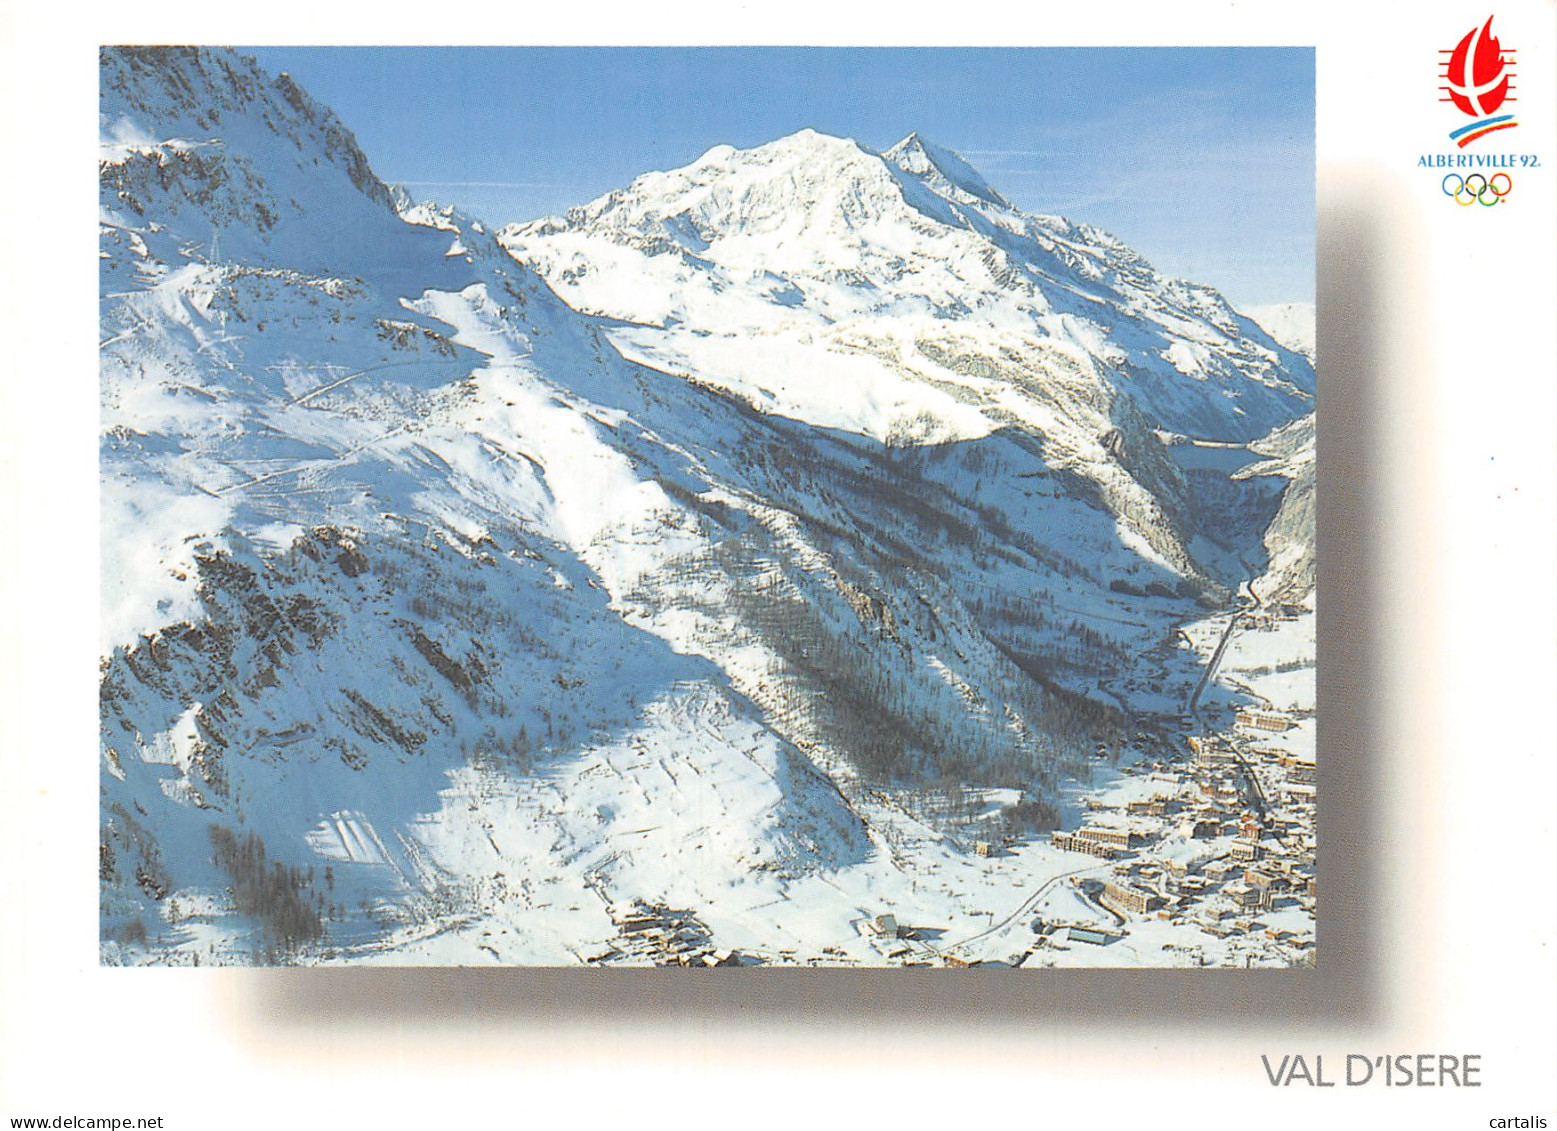 73-VAL D ISERE-N°4182-C/0025 - Val D'Isere